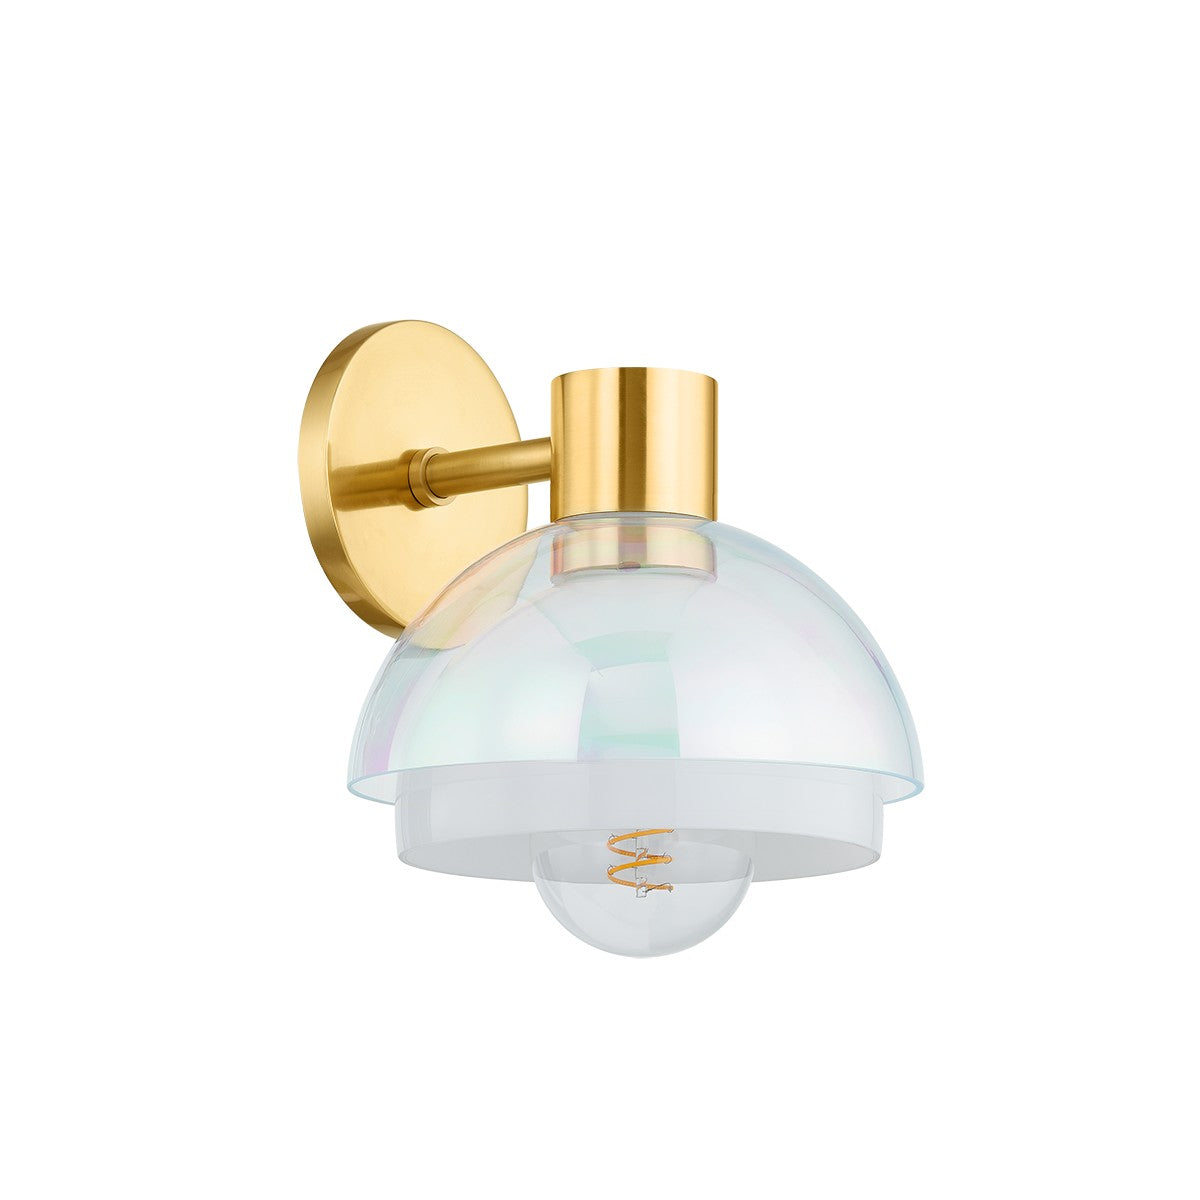 Mitzi - H844101-AGB - One Light Wall Sconce - Modena - Aged Brass